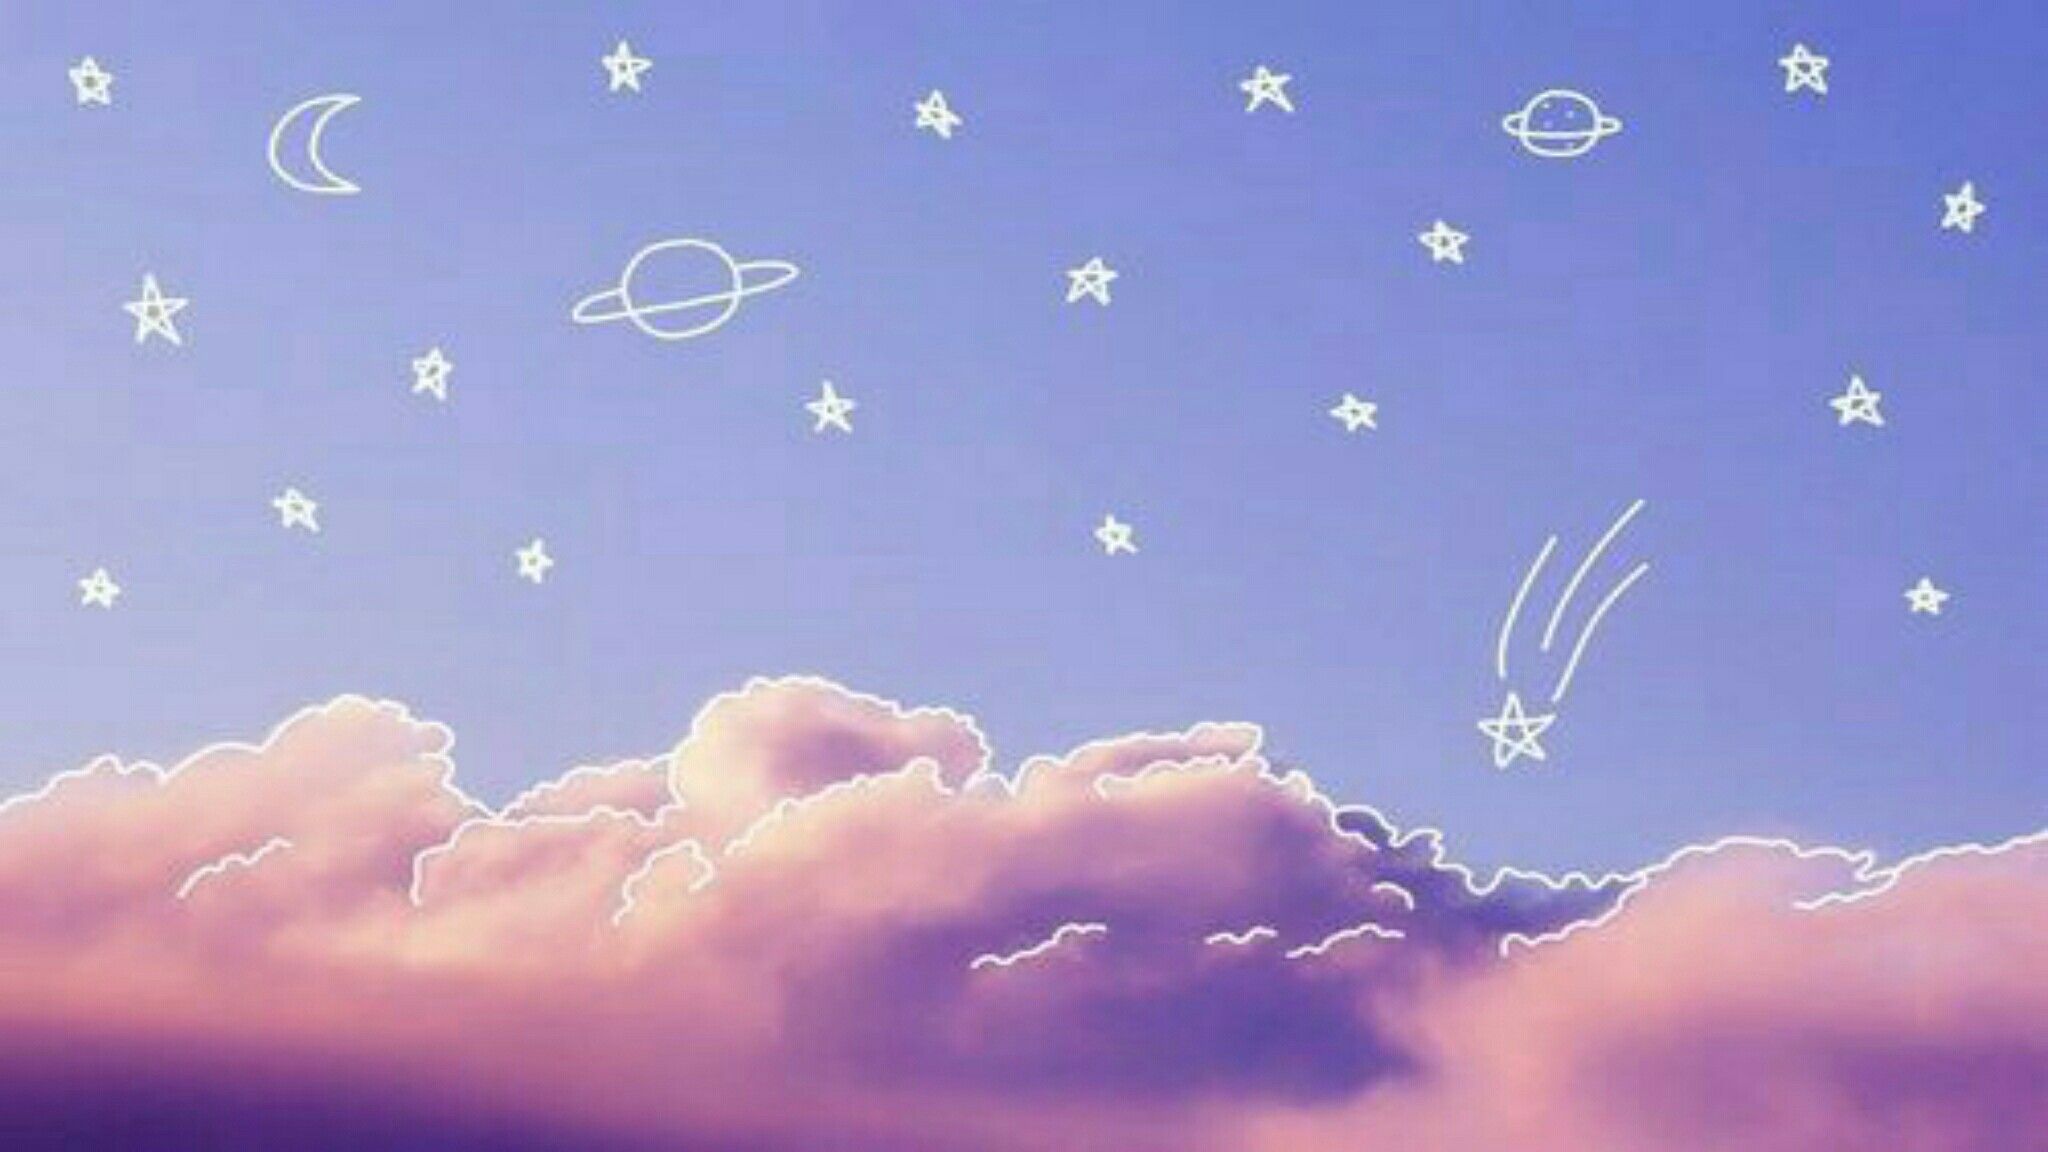 Aesthetic background of a blue sky with white stars, planets, and clouds. - 2048x1152, computer, desktop, cloud, laptop, witch, princess, kawaii, doodles, candy, scenery, YouTube